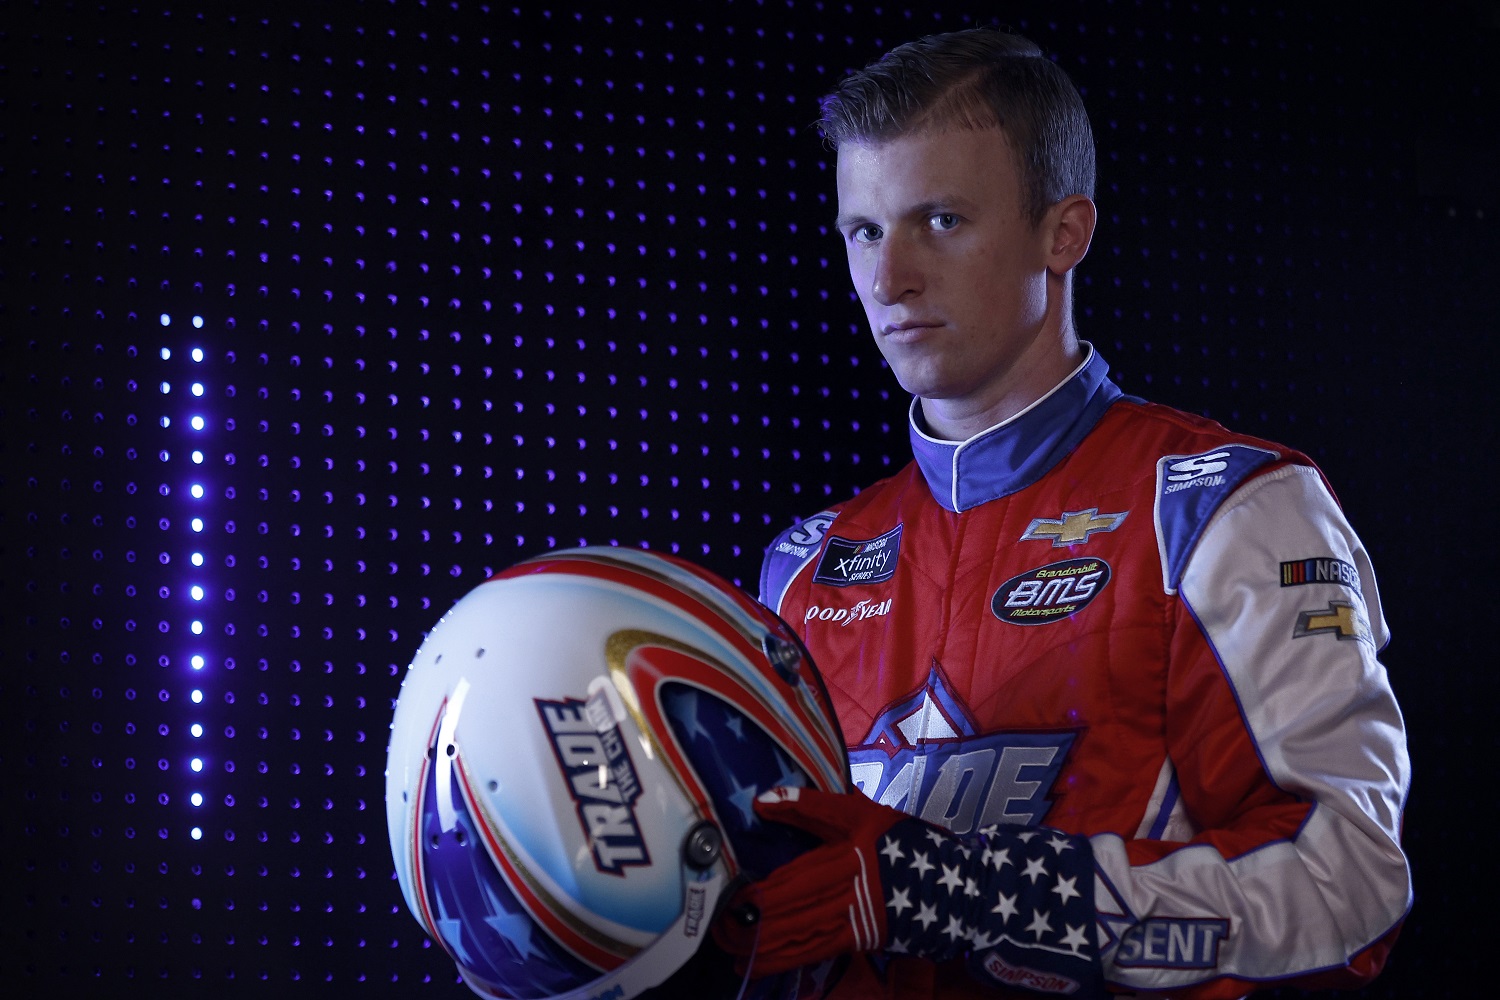 NASCAR driver Brandon Brown poses for a photo during NASCAR Production Days at Clutch Studios on Jan. 19, 2022 in Concord, North Carolina.